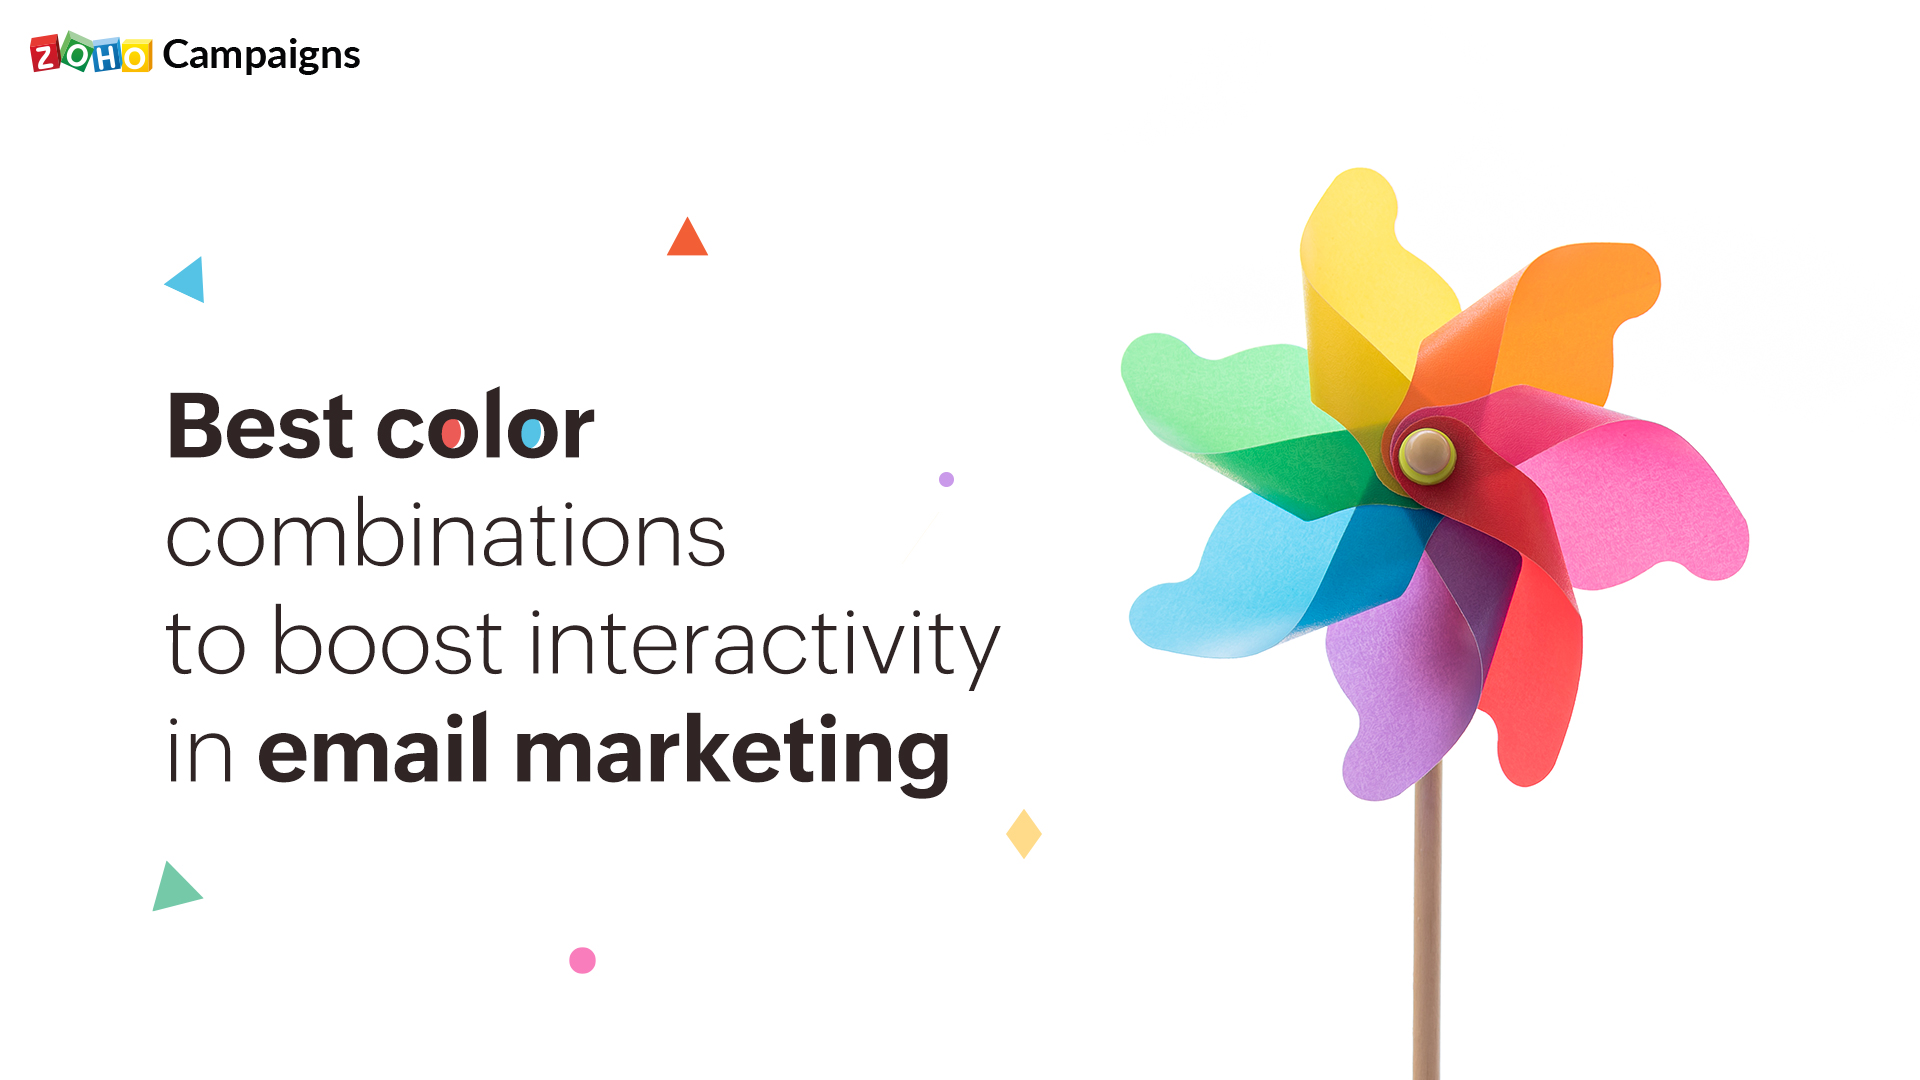 How to get the best color combinations to boost interactivity in email marketing